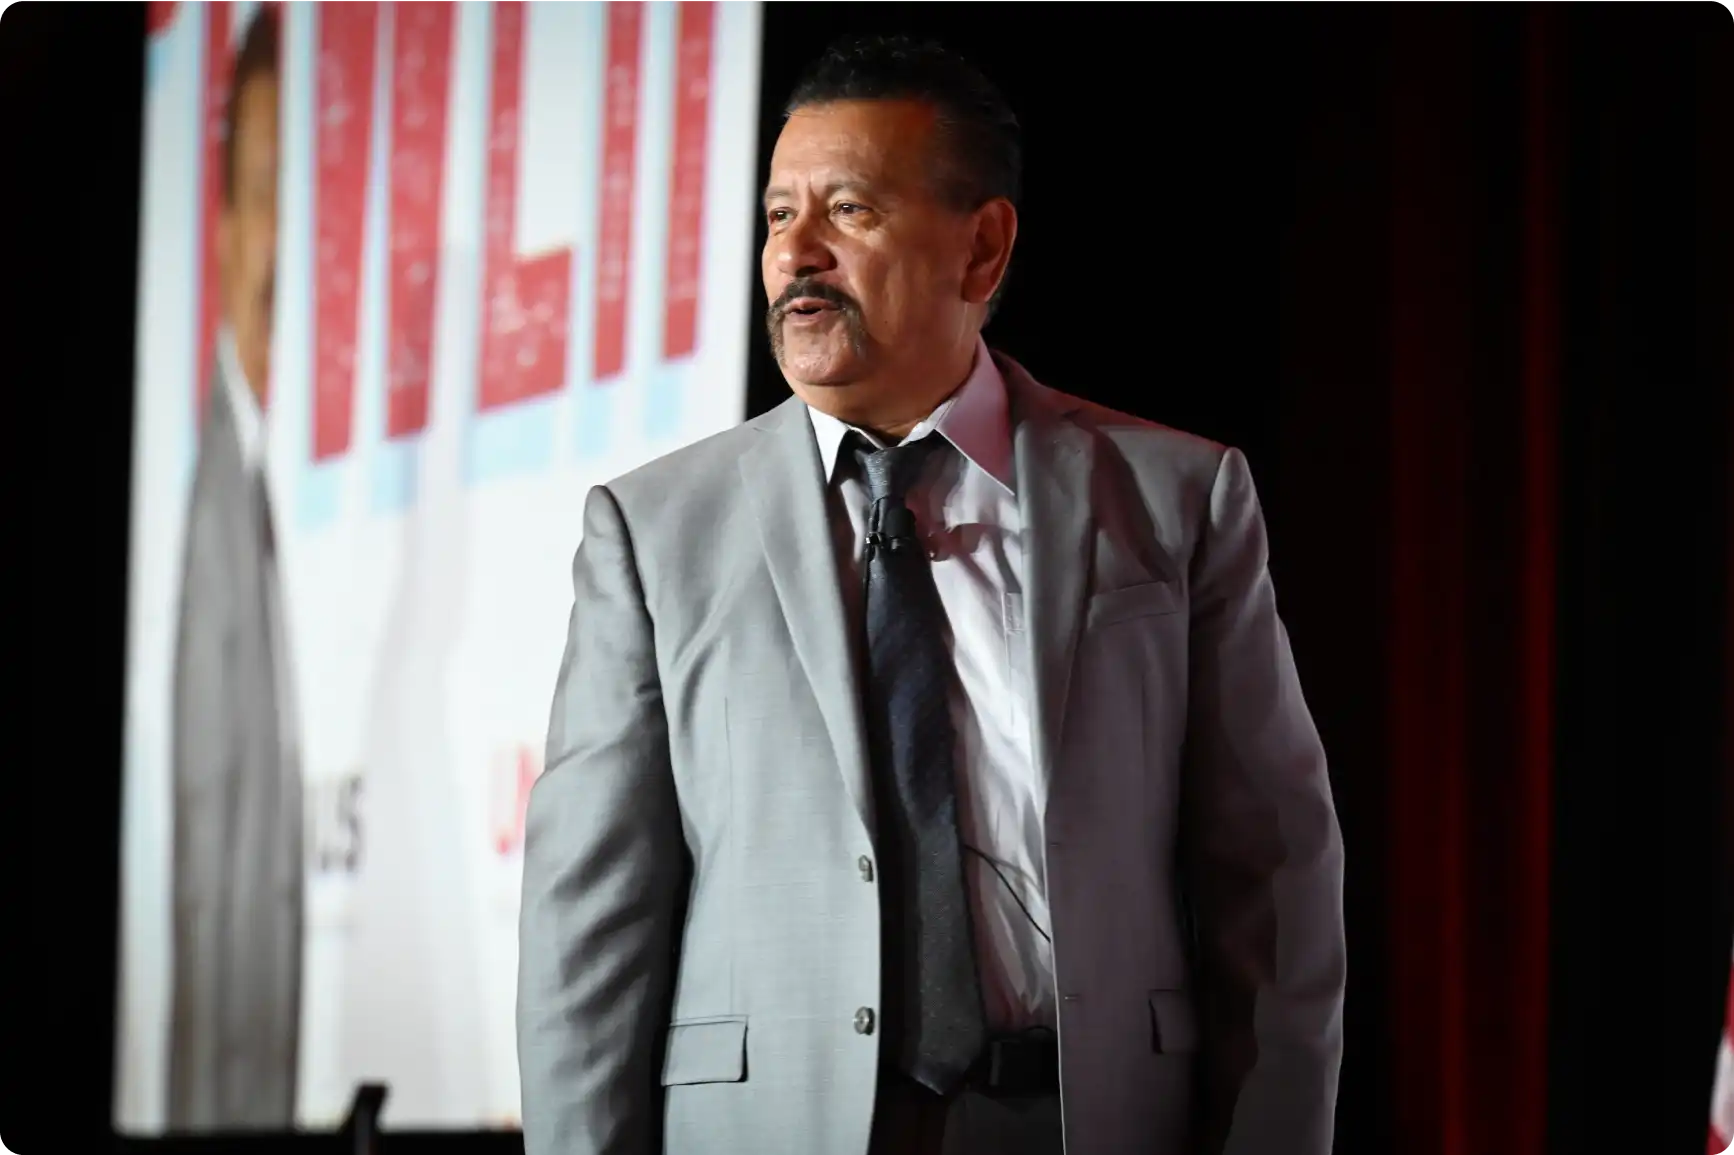 Richard Montañez, the real-life inspiration for the movie 'Flamin' Hot,'' speaks at the UnidosUS Annual Conference in Chicago, IL.